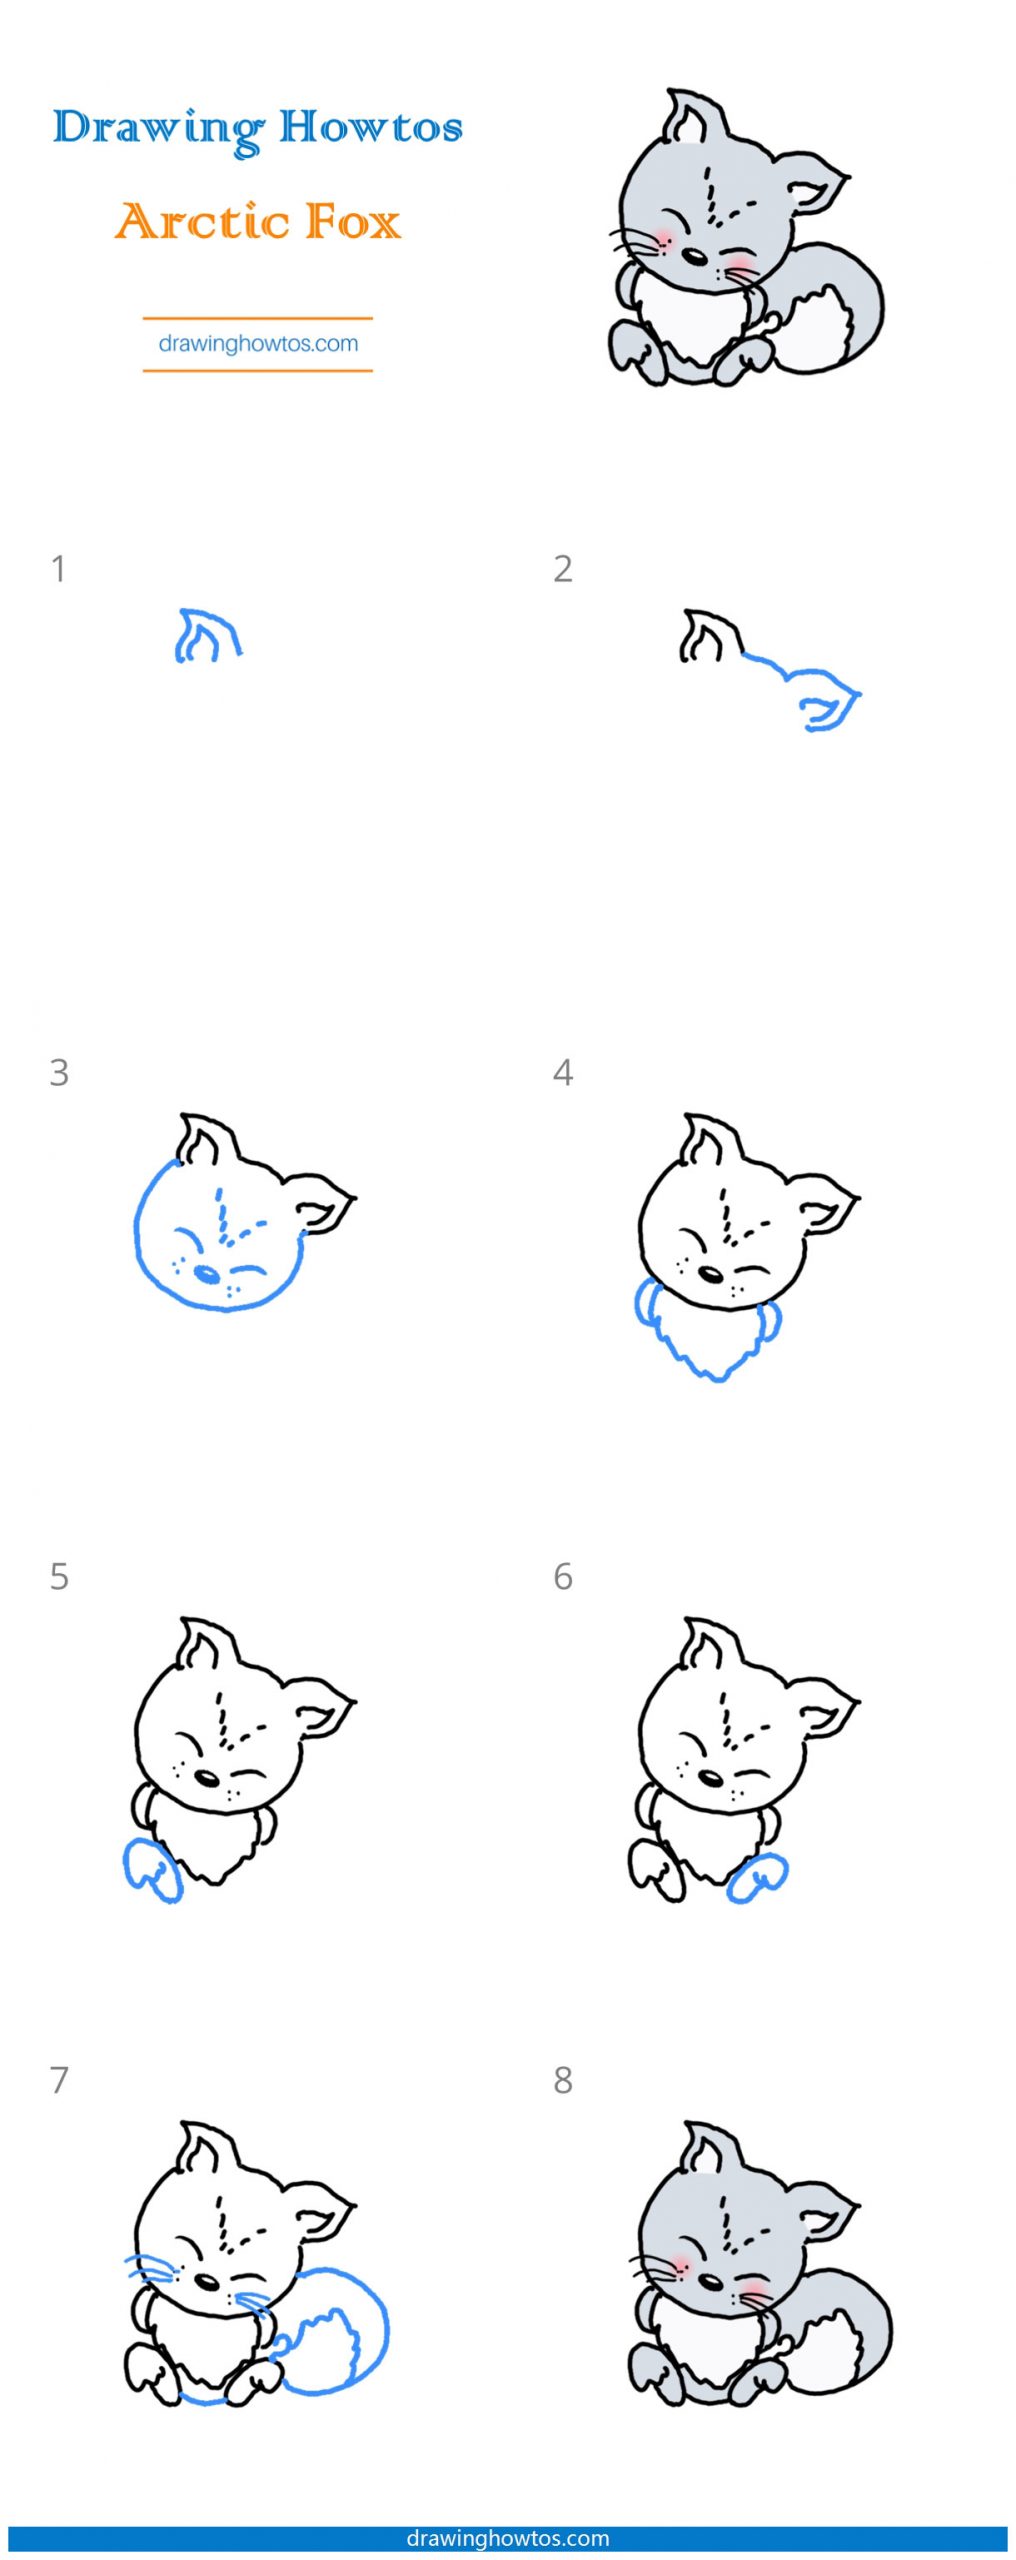 How to Draw an Arctic Fox Step by Step